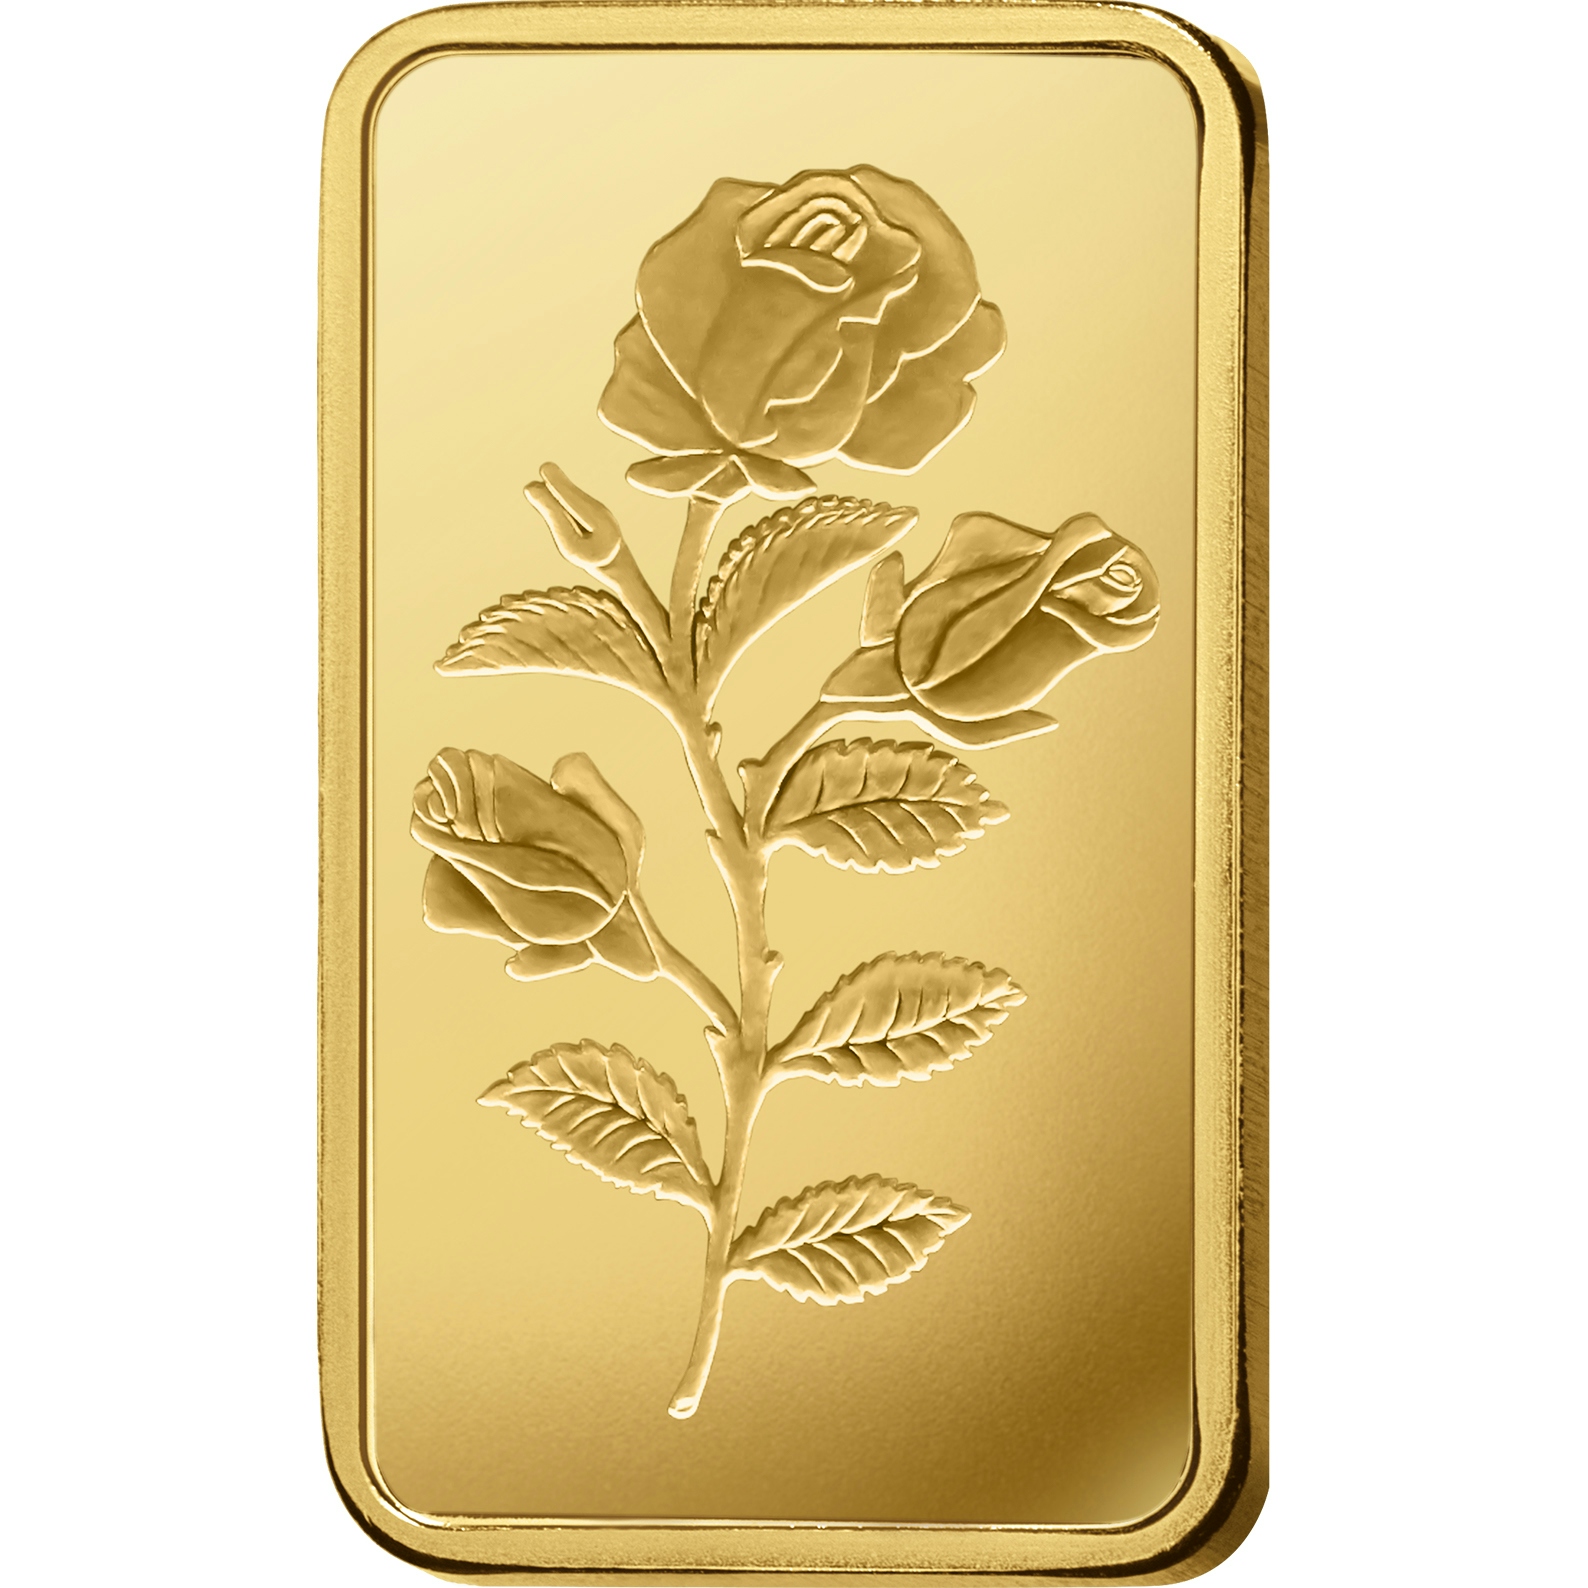 Achat d'or, 50 gram d'or pur Rosa - PAMP Suisse - Front 